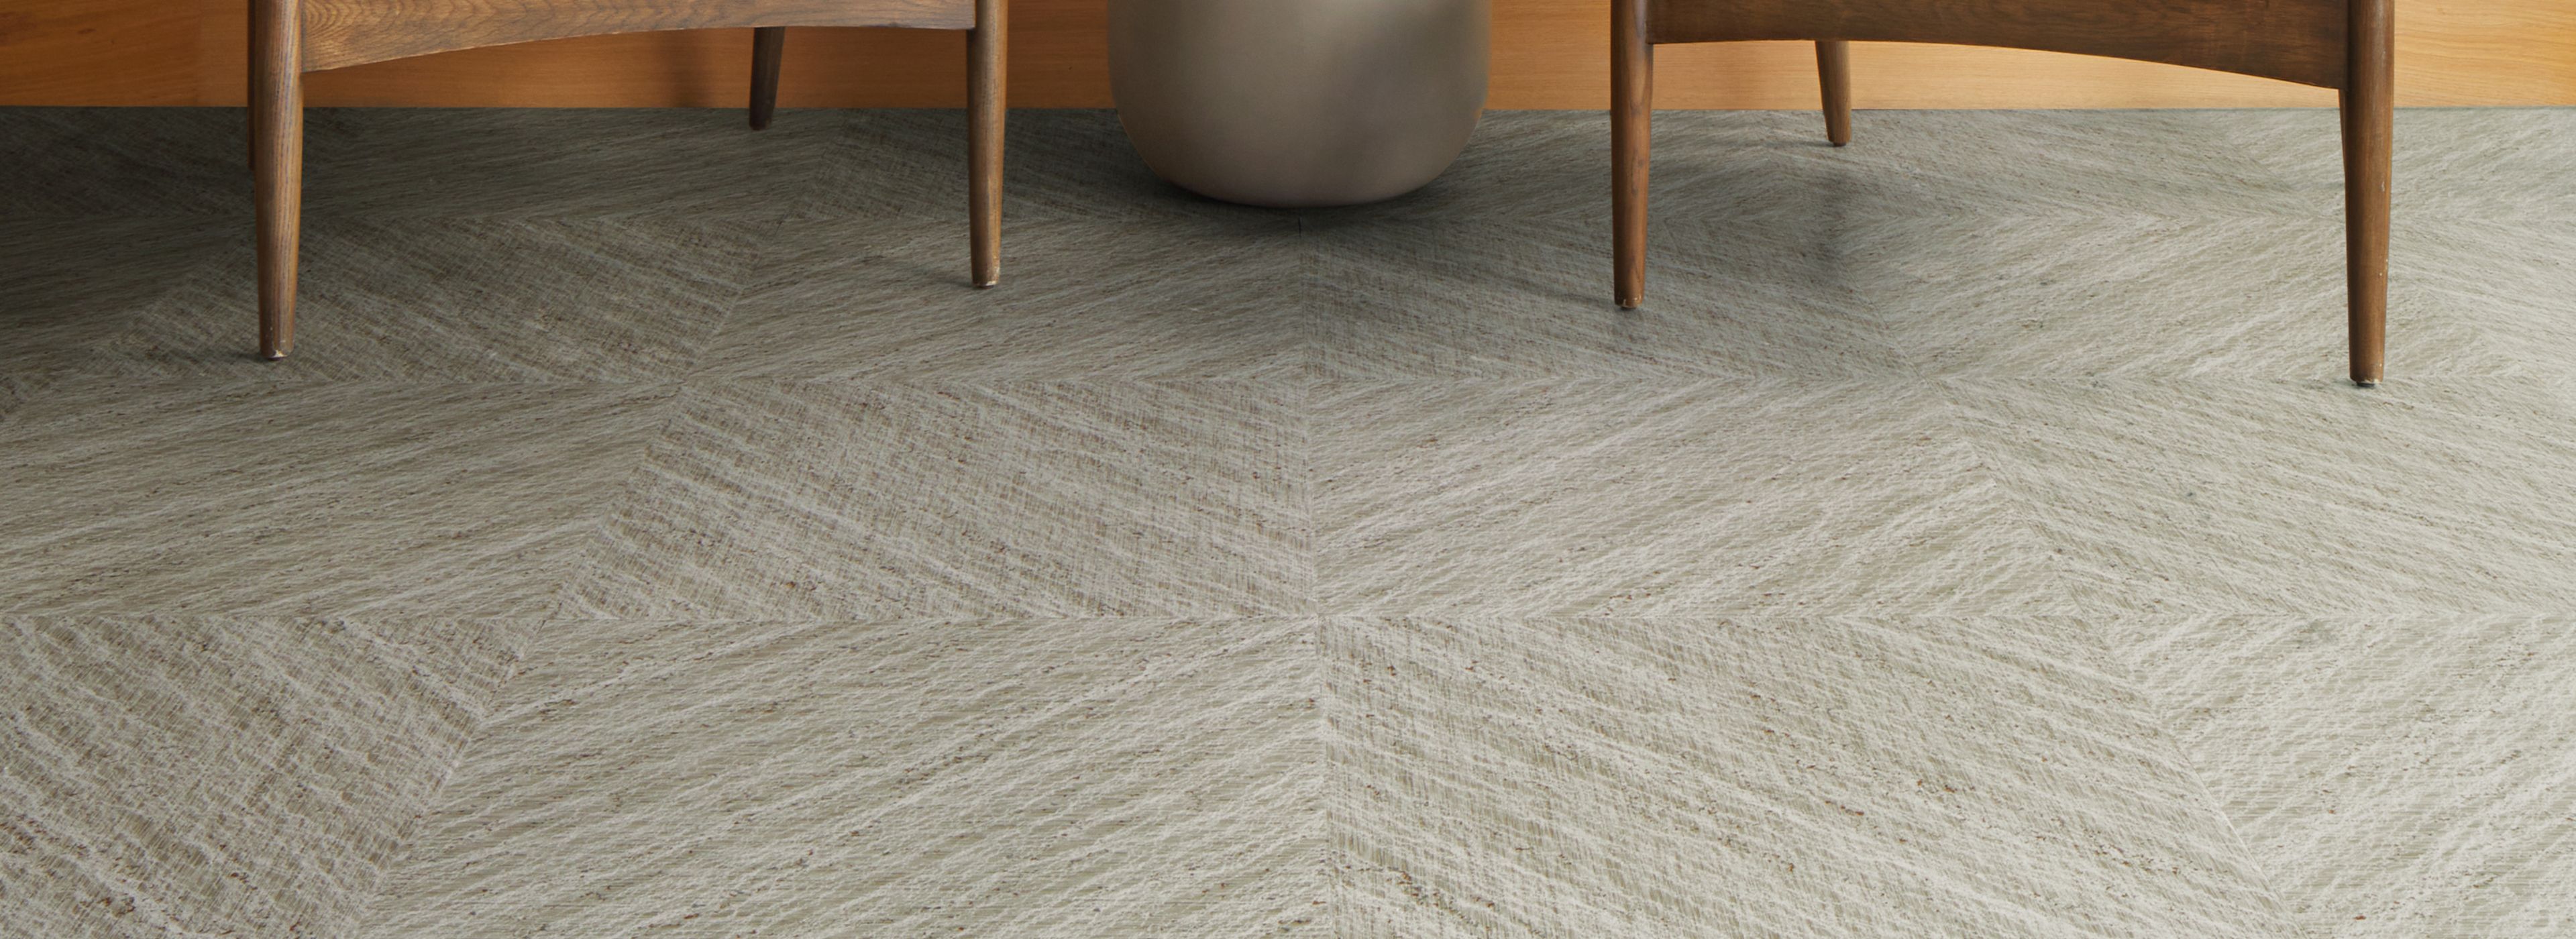 Interface Ridge LVT in Agate shown in a casual seating area numéro d’image 1